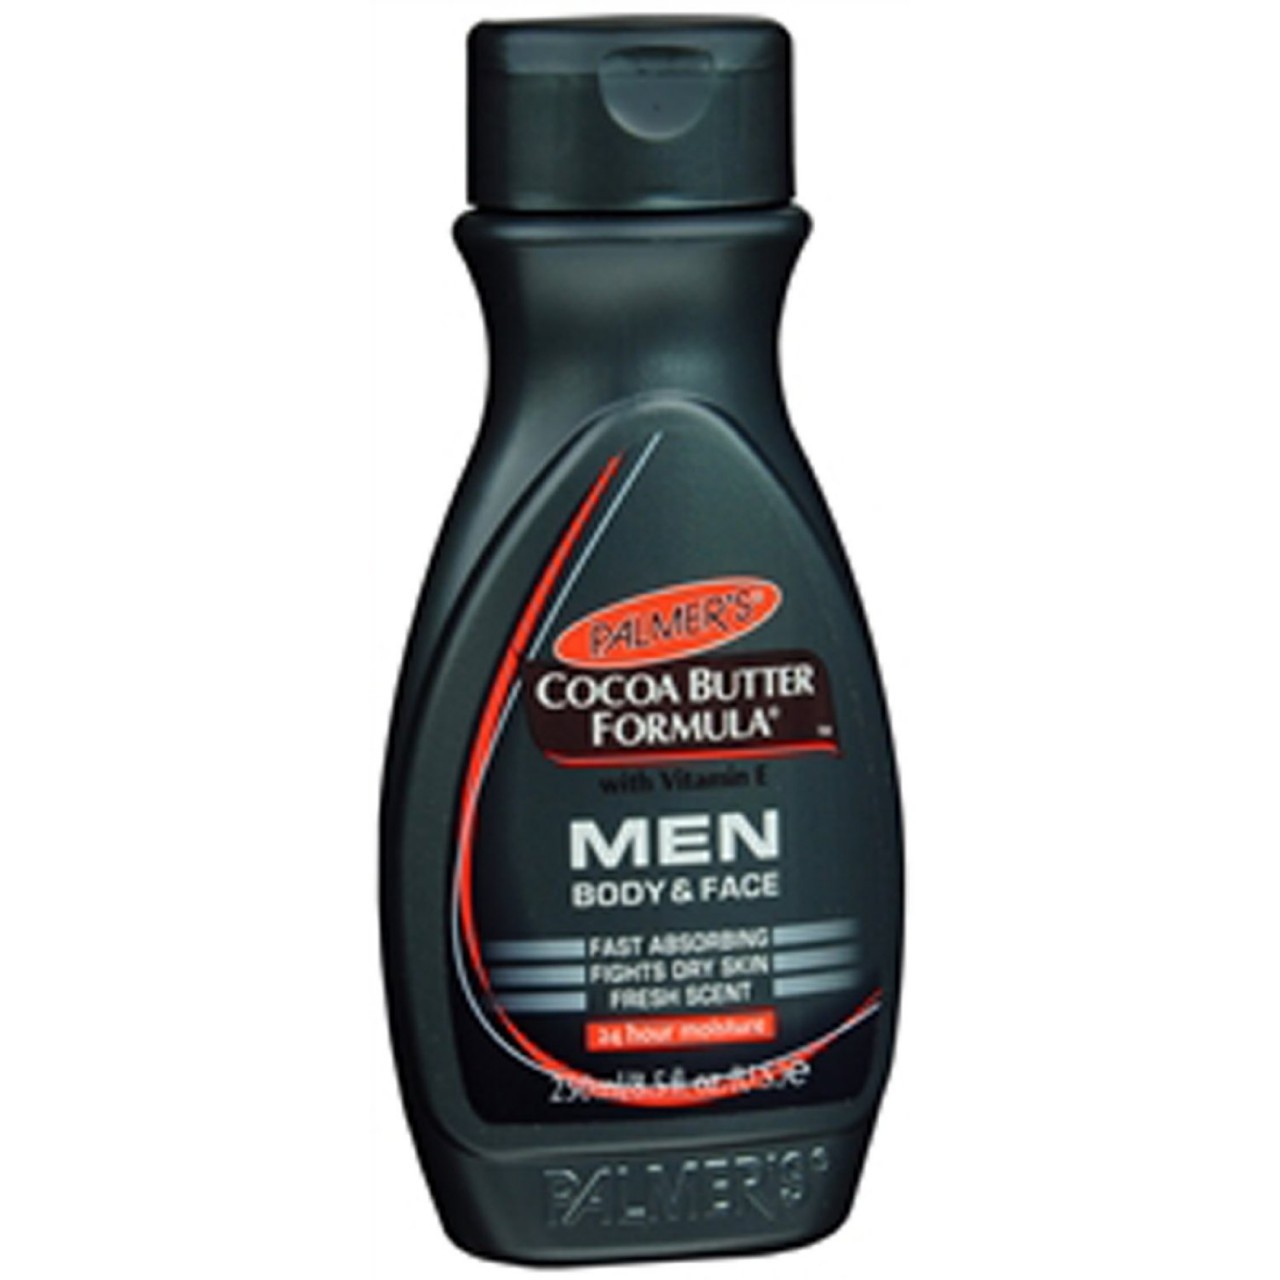 Palmer's Cocoa Butter For Men Face and Body Lotion